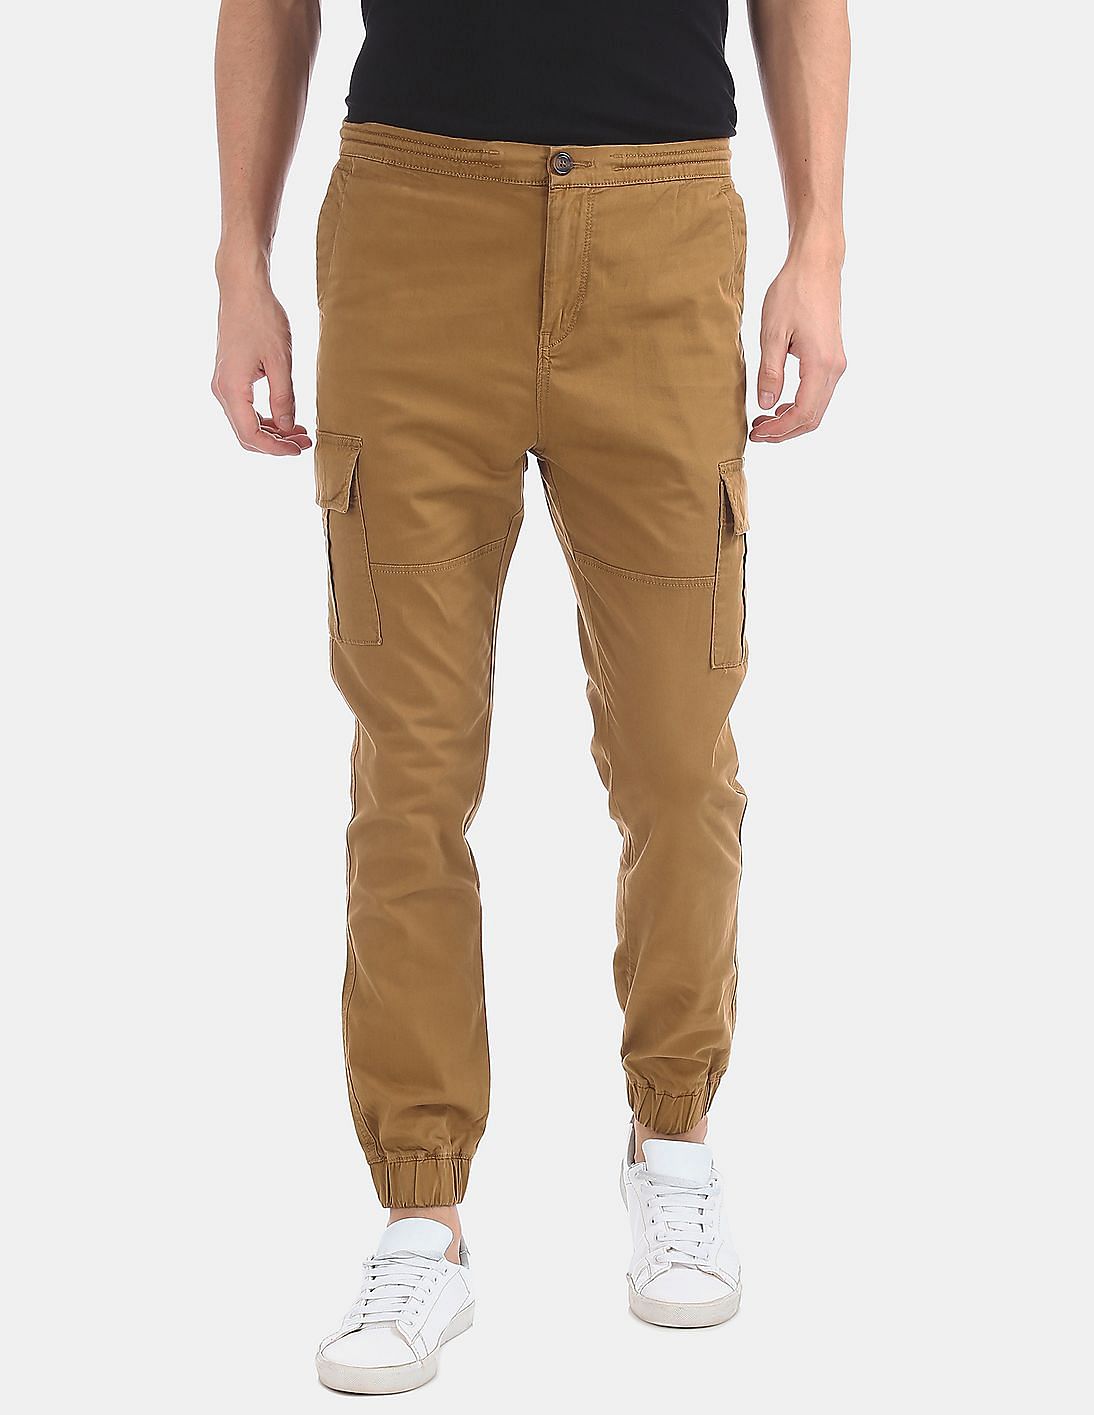 Buy Aeropostale Brown Panelled Cargo Joggers - NNNOW.com